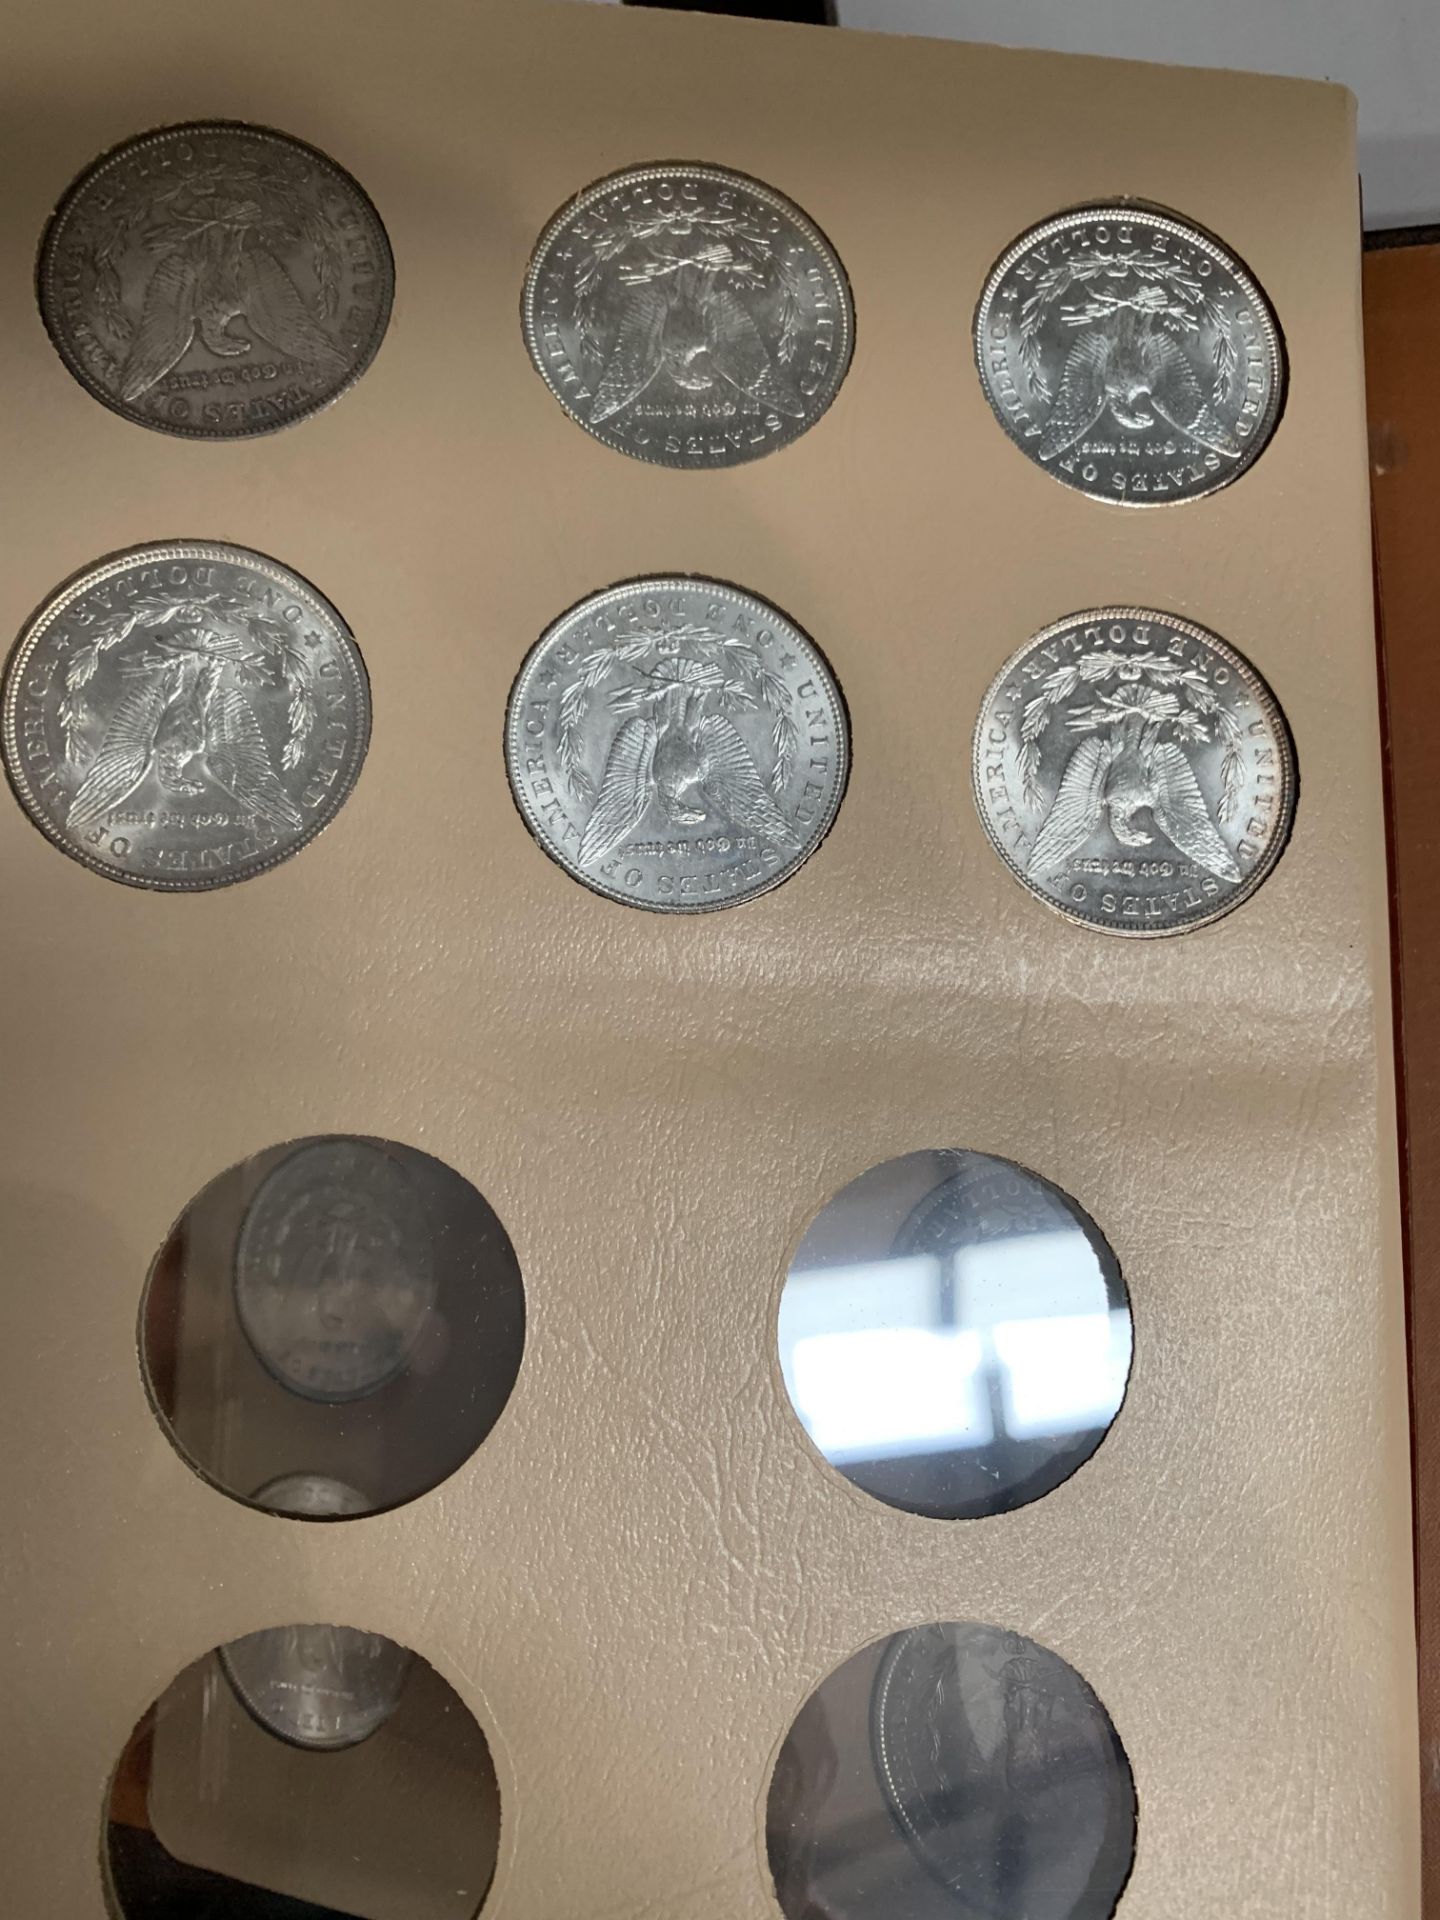 Morgan silver dollar complete date set 1878-1904 - 28 coins including rare dates 1893 and 1895 - Image 9 of 10